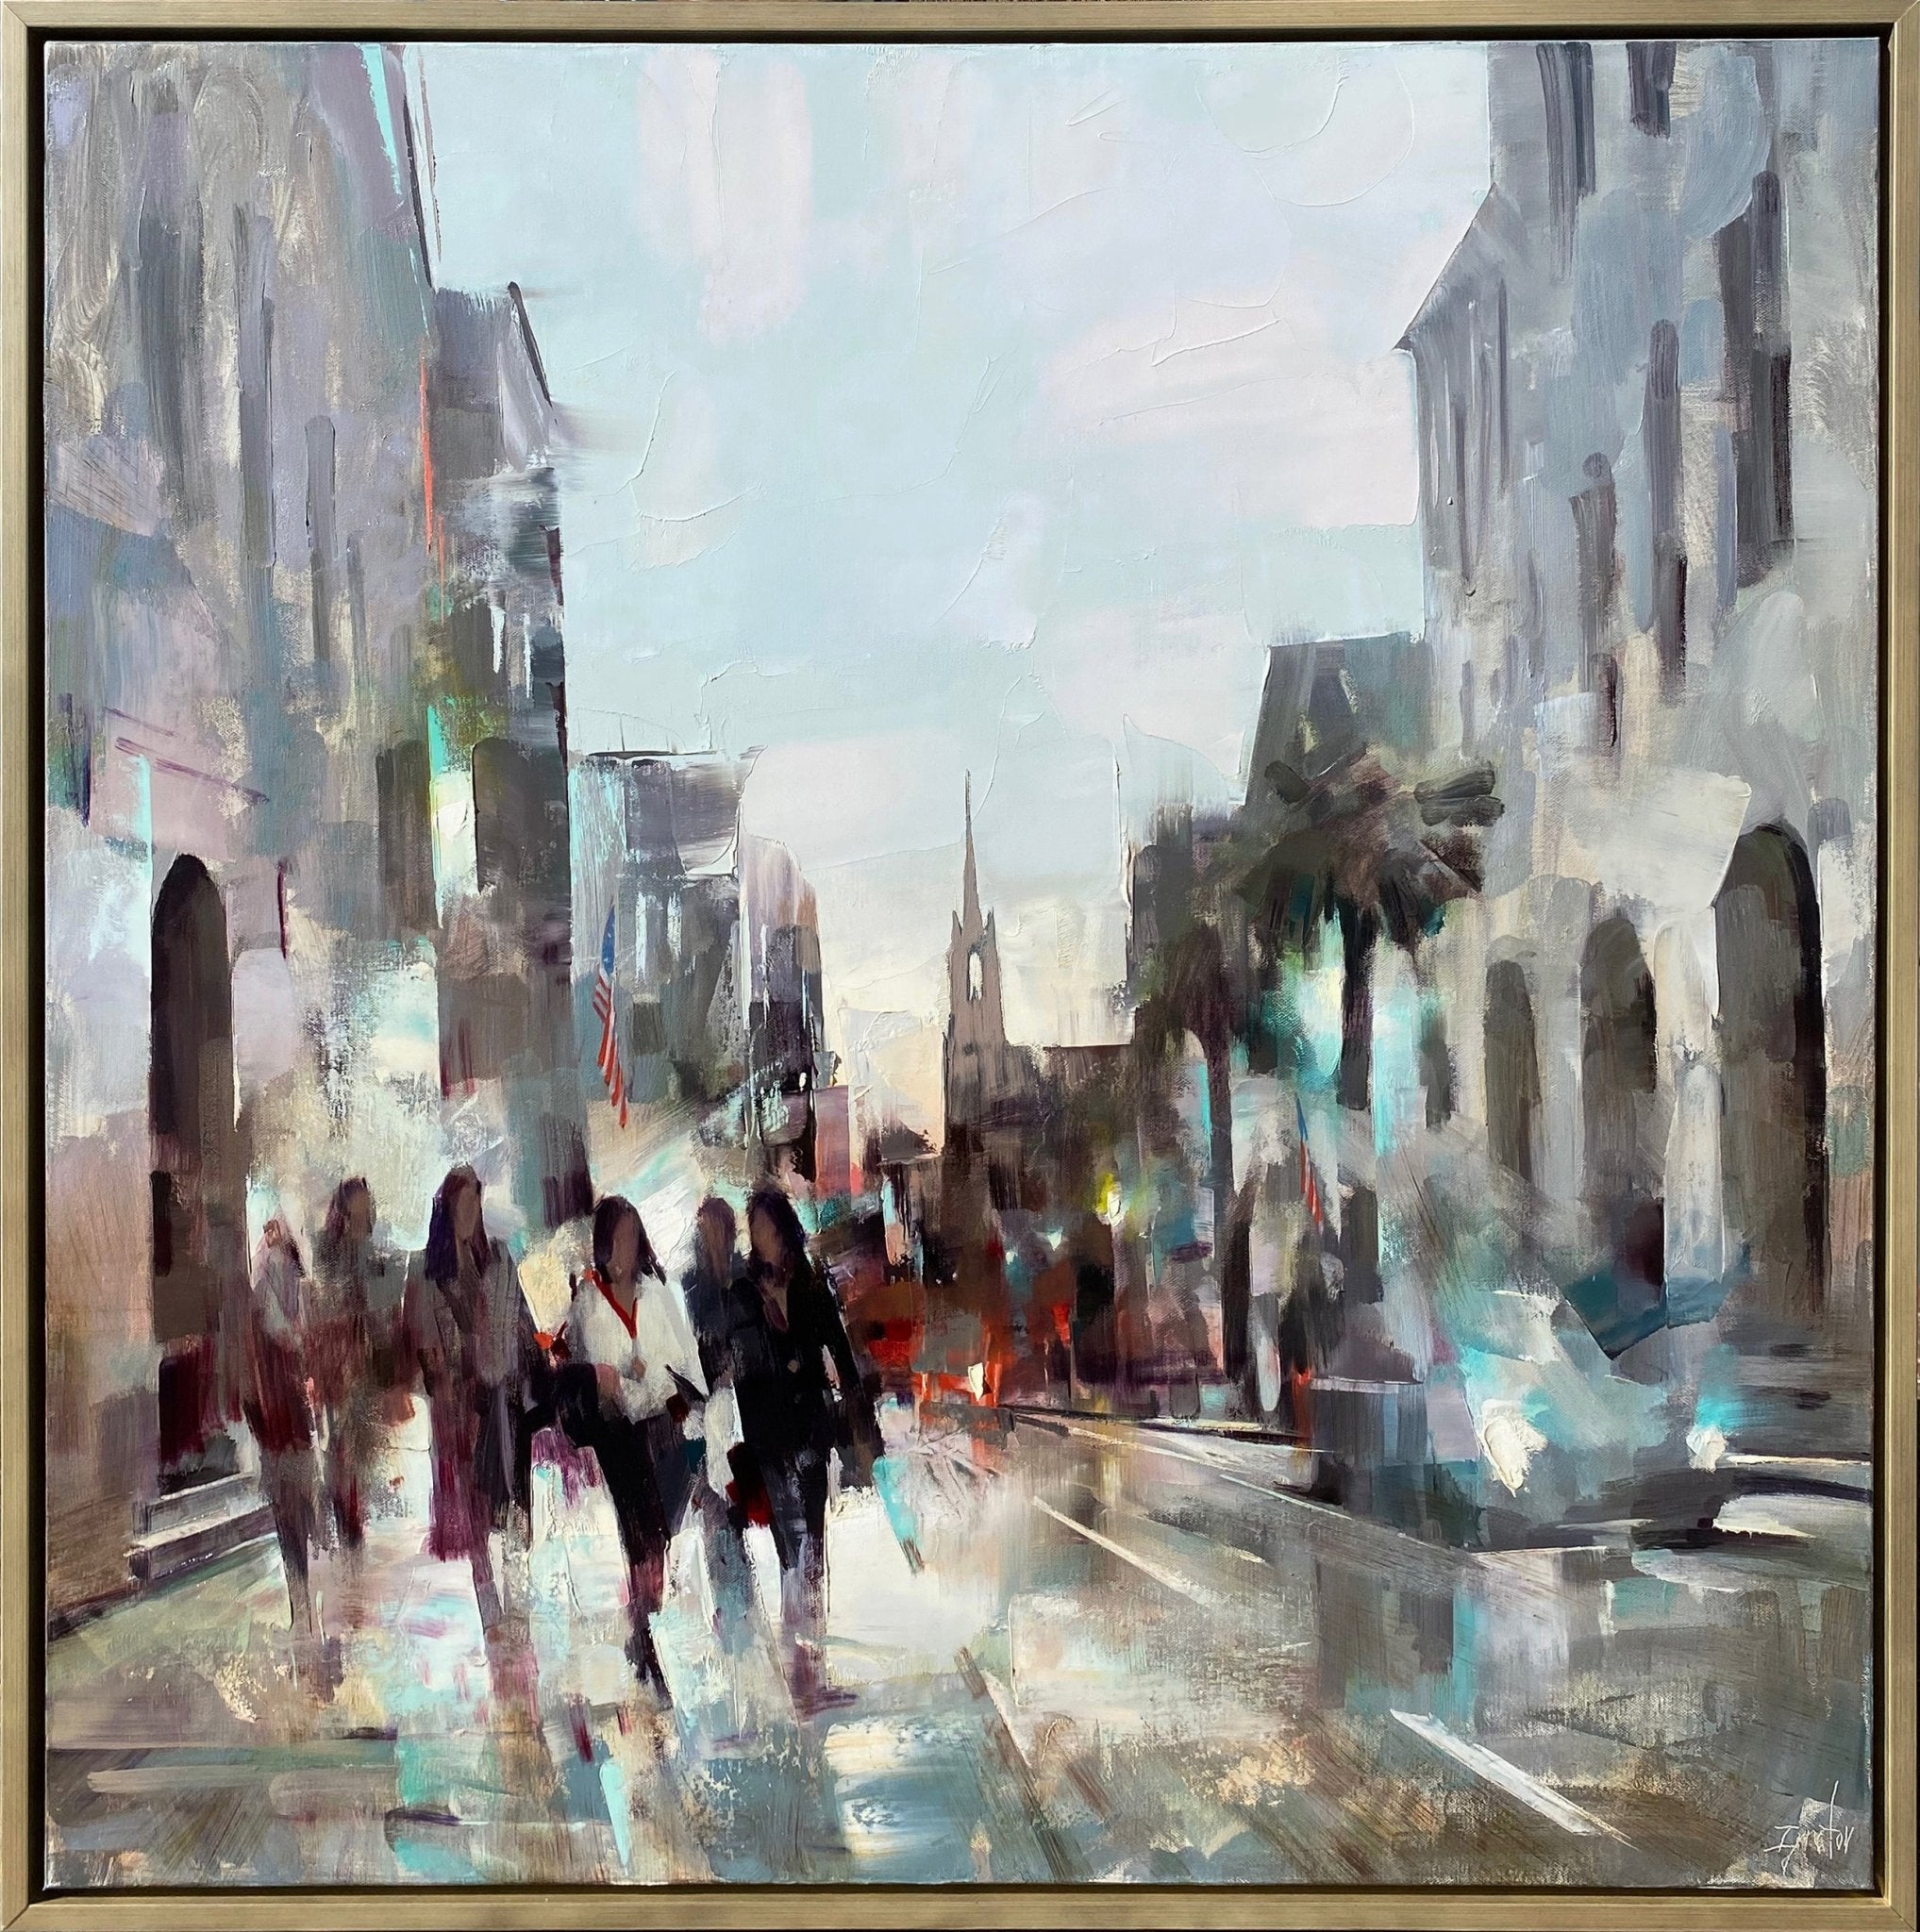 Strolling Four Corners of Law by Ignat Ignatov at LePrince Galleries